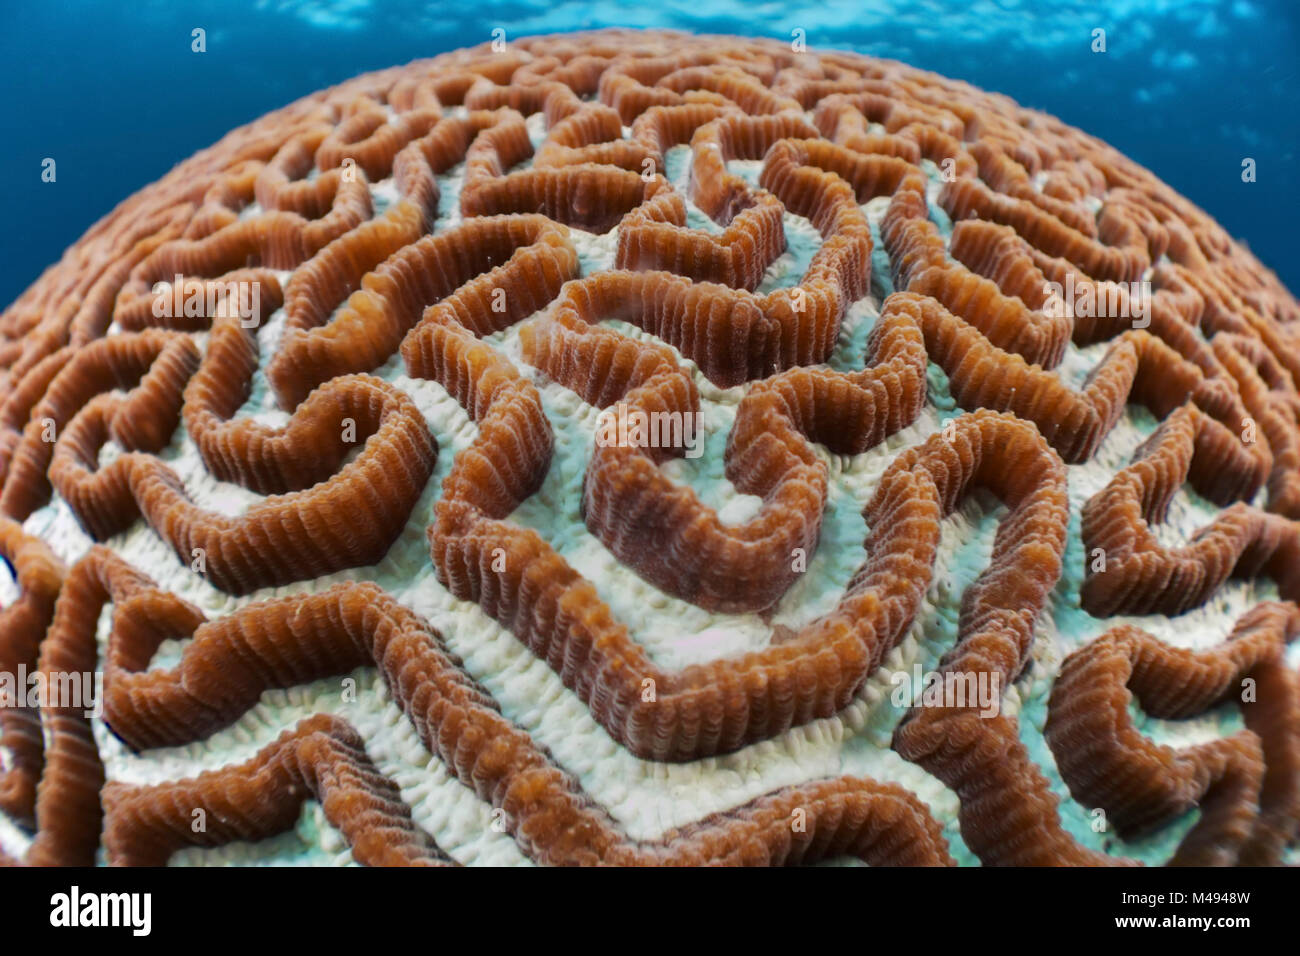 Hard coral (Platygyra) in shallow blue water, Ambon, Indonesia Stock Photo